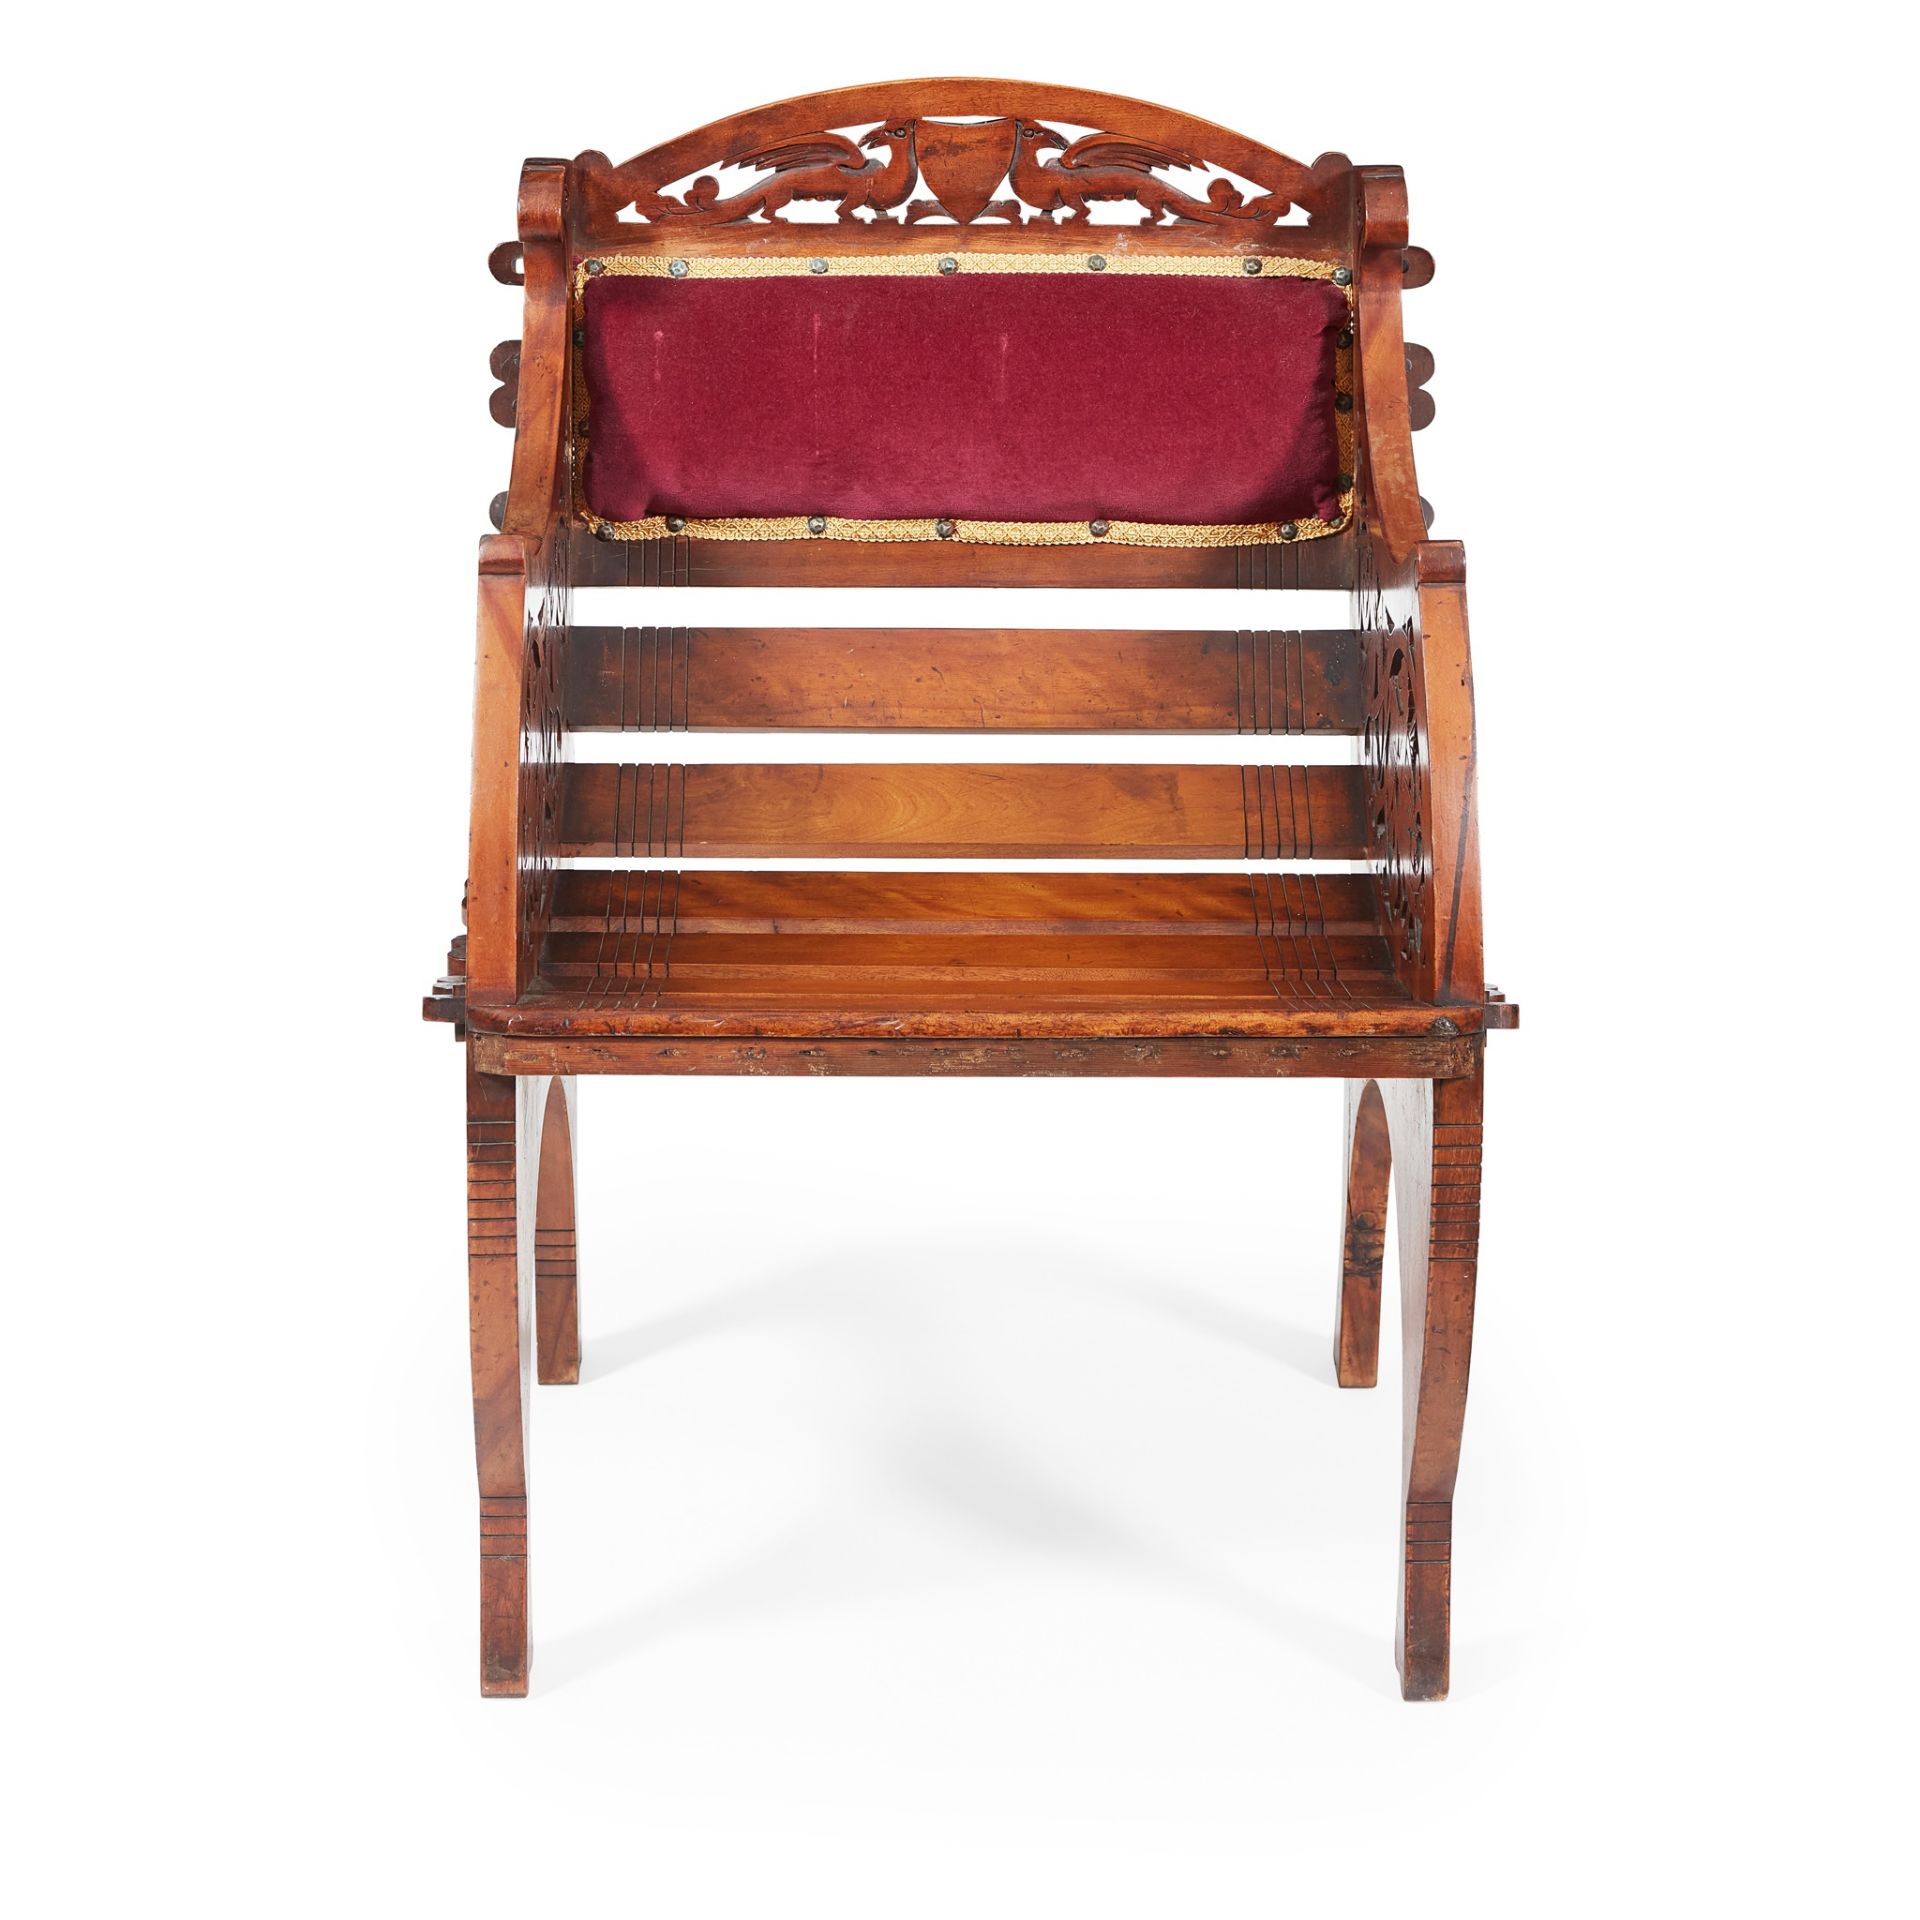 WALFORD & DONKIN, LONDON GOTHIC REVIVAL ARMCHAIR, CIRCA 1870 - Image 3 of 3